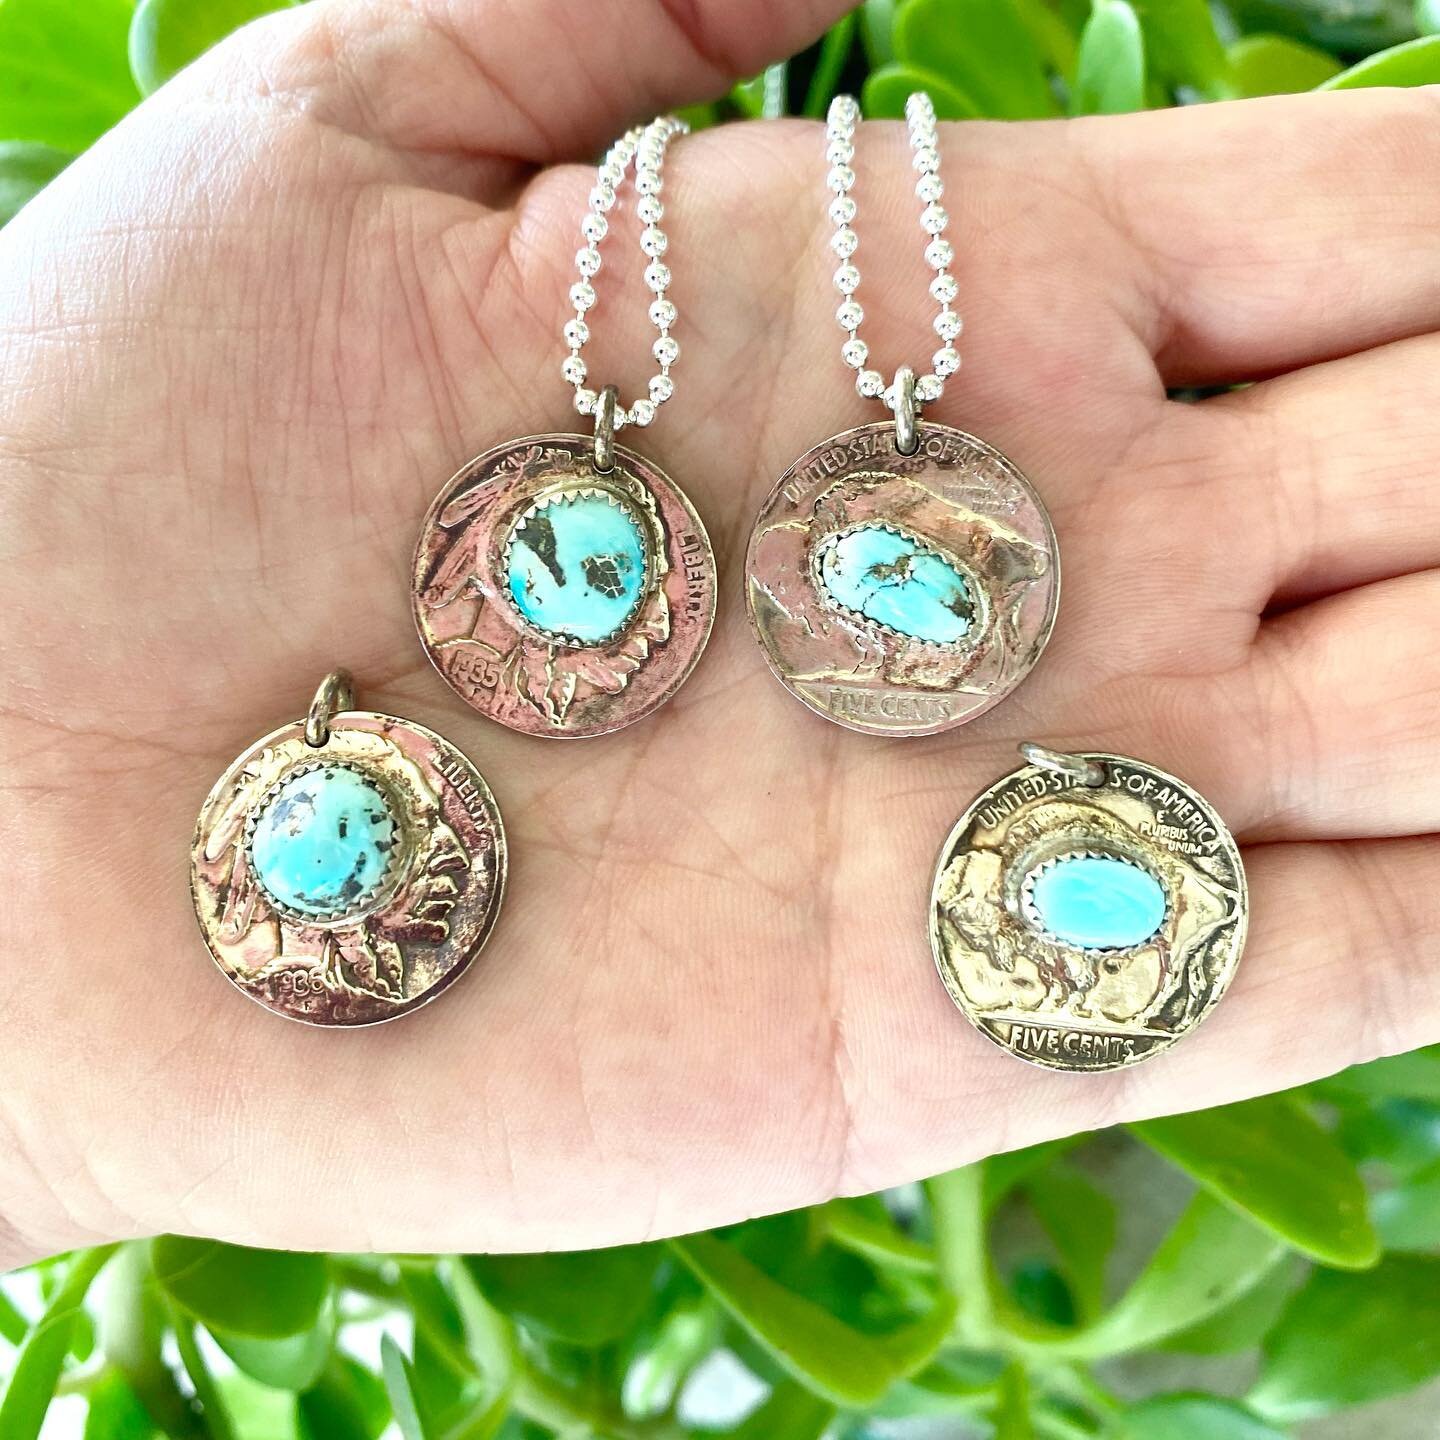 Love these Buffalo Nickel necklaces, also called Indian Heads. We had these custom made just for you! Beautiful turquoise embellishes each coin and how fun is this sterling silver ball chain? Let us customize the length for you 💠